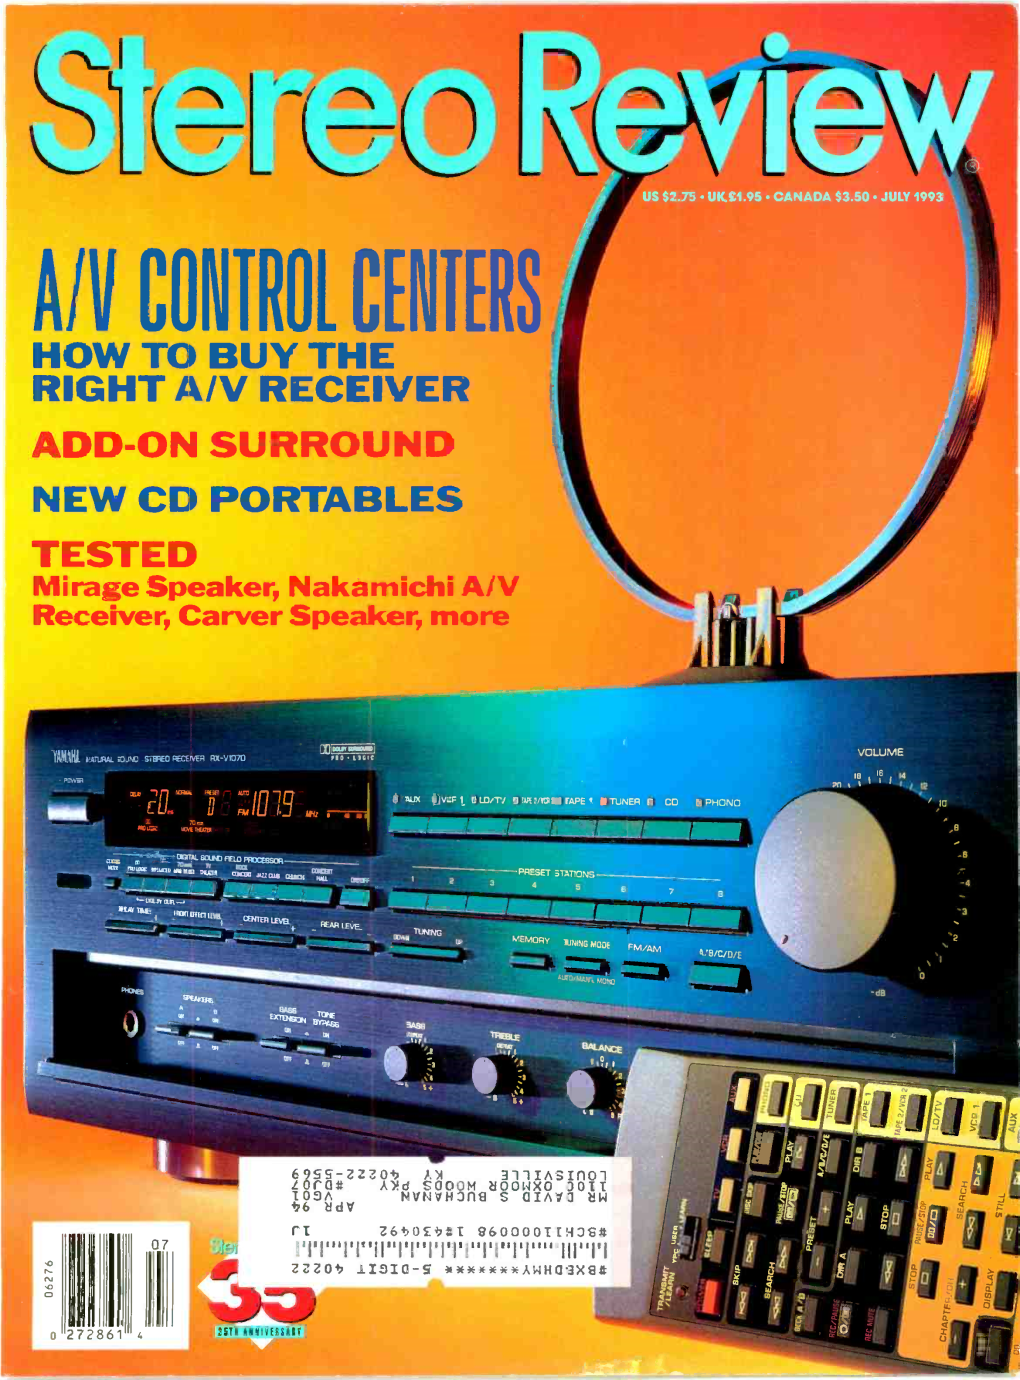 AN CONTROL CENTERS HOW to BUY the RIGHT A/V RECEIVER ADD-ON SURROUND NEW CD PORTABLES TESTED Mirage Speaker, Nakamichi A/V Receiver, Carver Speaker, More